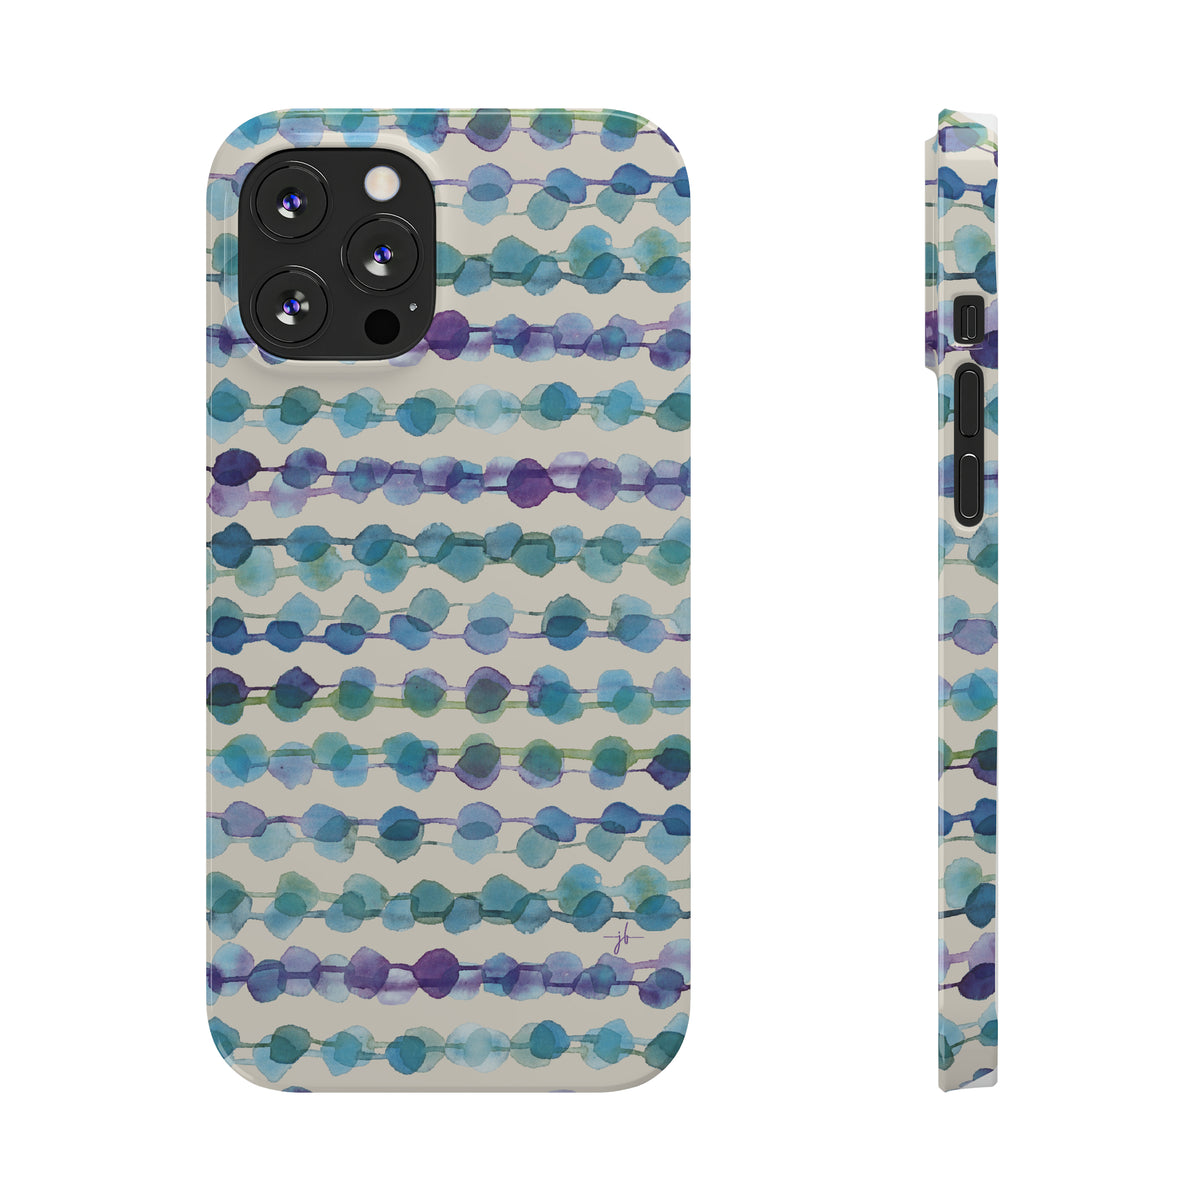 watercolor geometric striped pattern on iPhone case shown from front and side